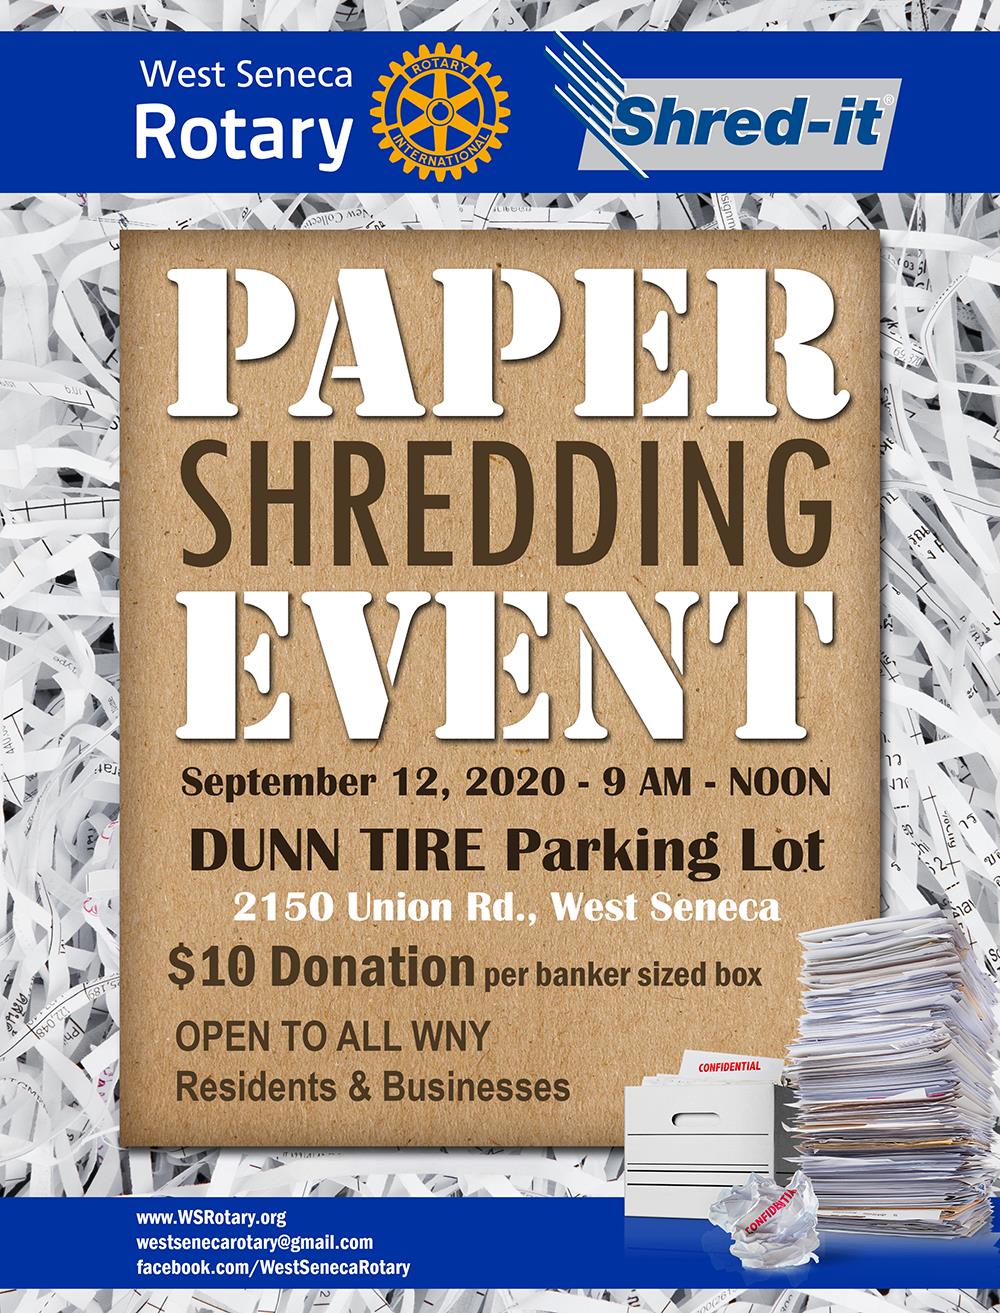 WS Rotary Shred it event